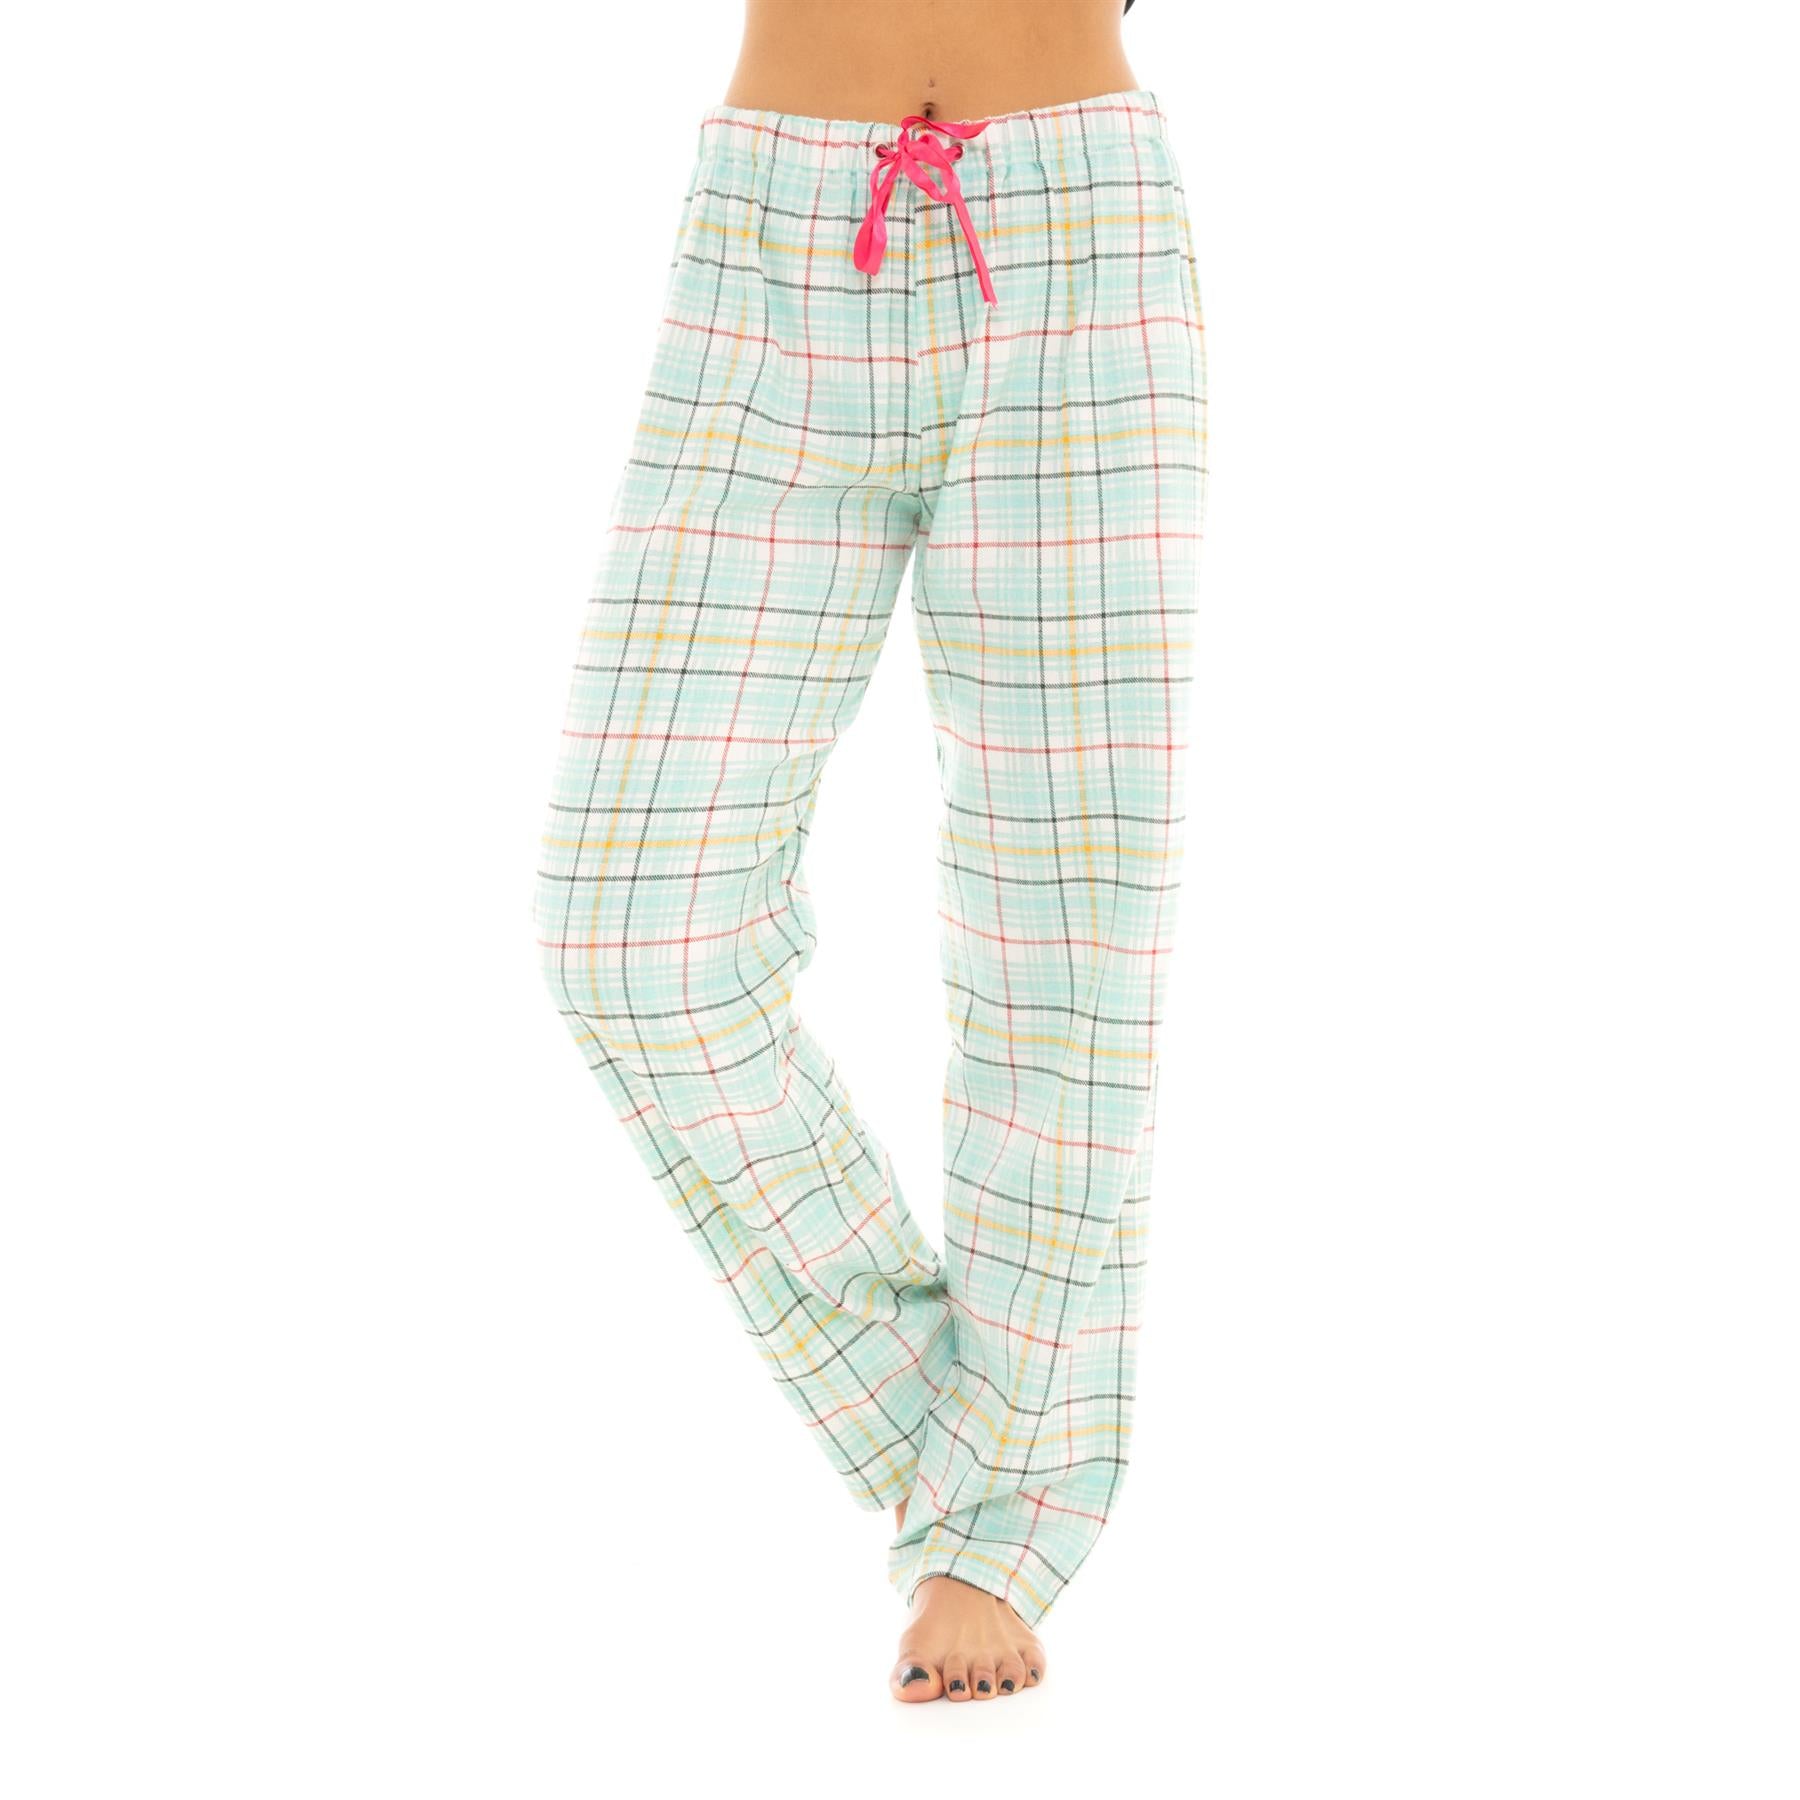 Teal Flannel Lounge Pants